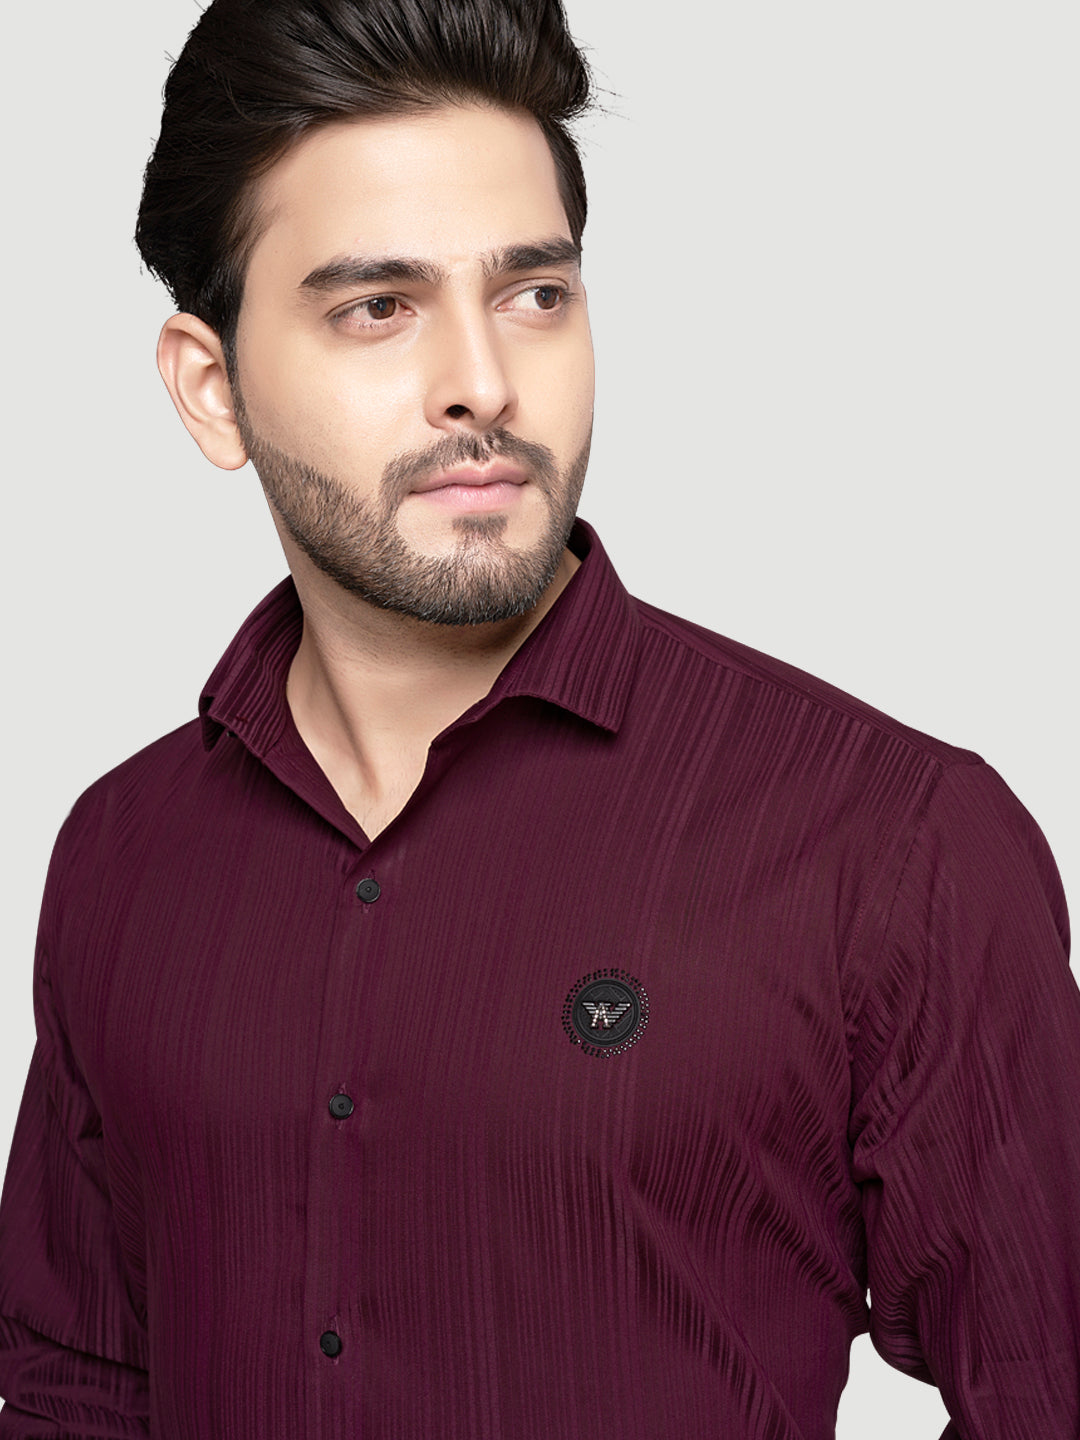 Black and White Shirts Men's Designer Shirt with Broach-2